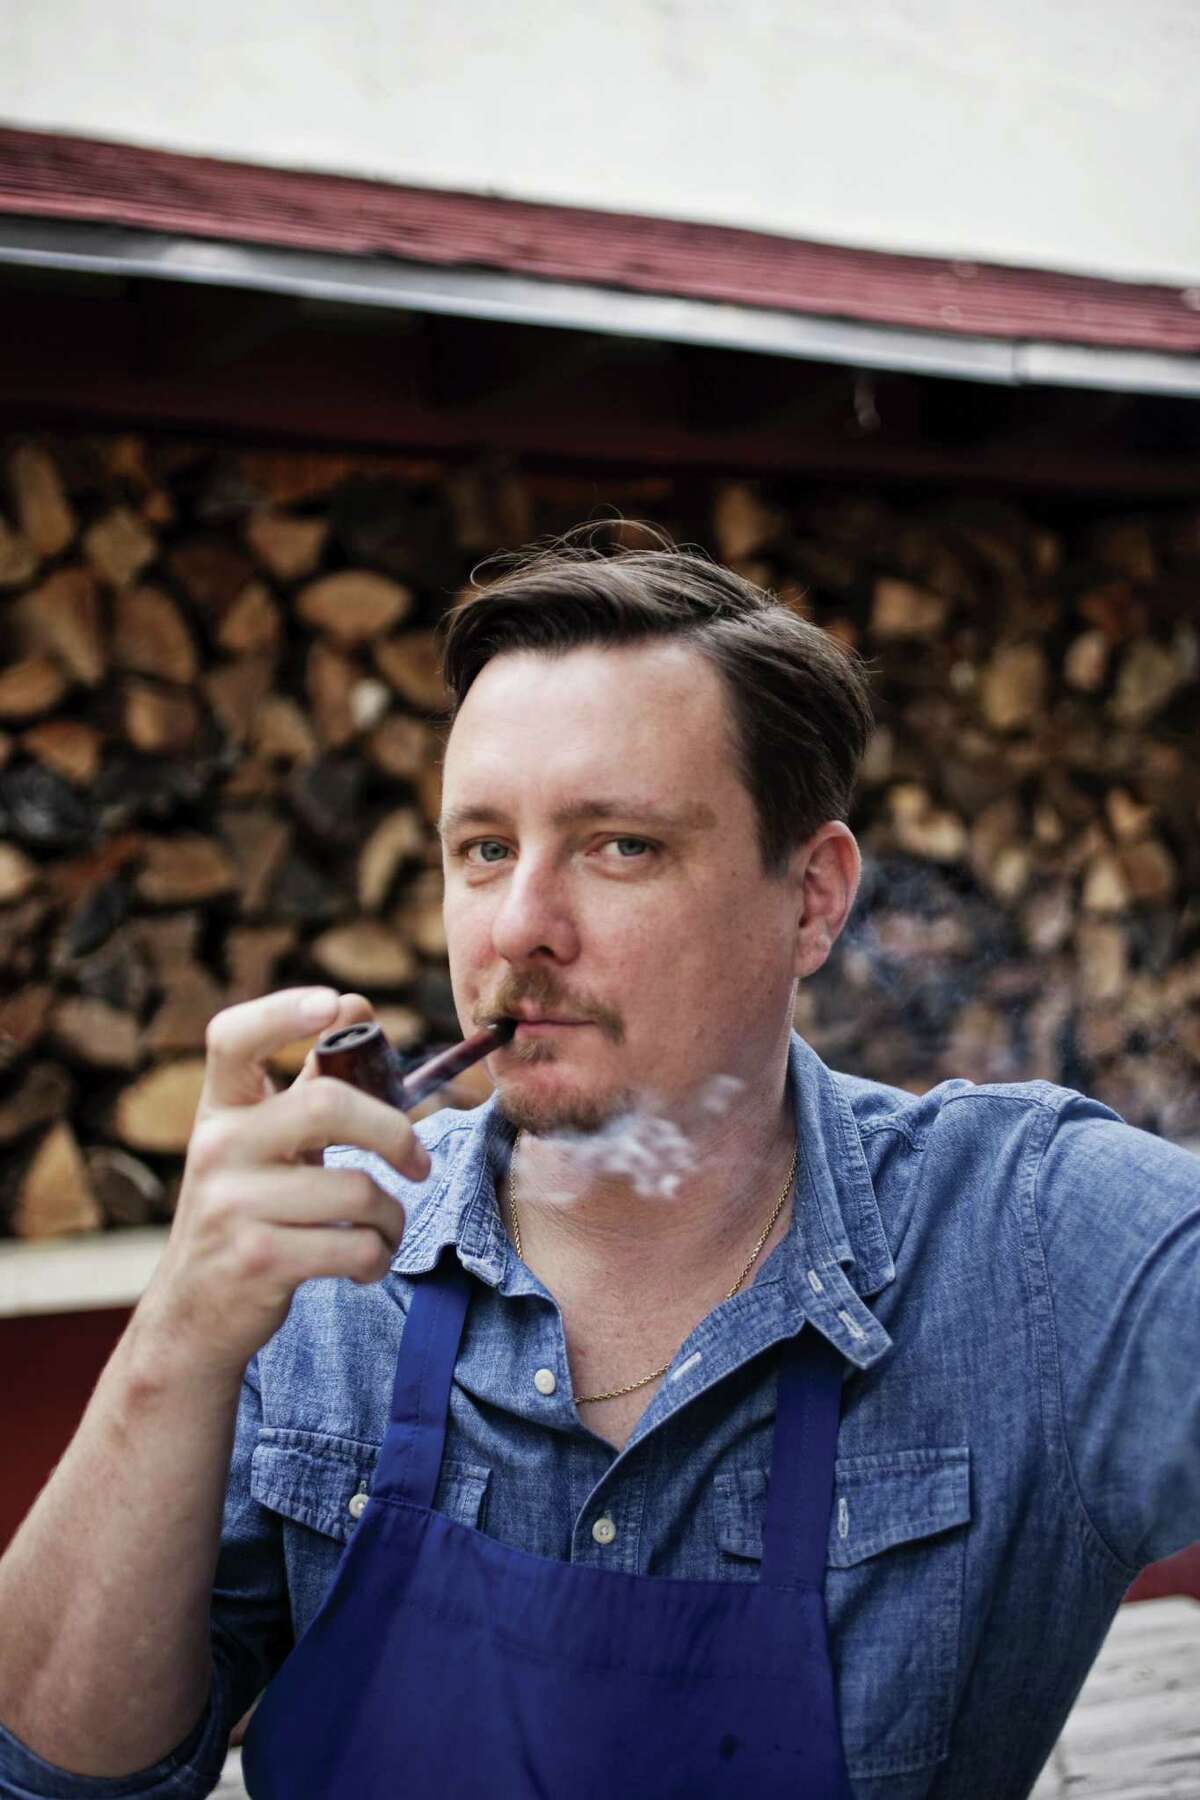 Tim Byres opened Smoke, a Dallas restaurant, in 2009. Now he's written a book by the same name.